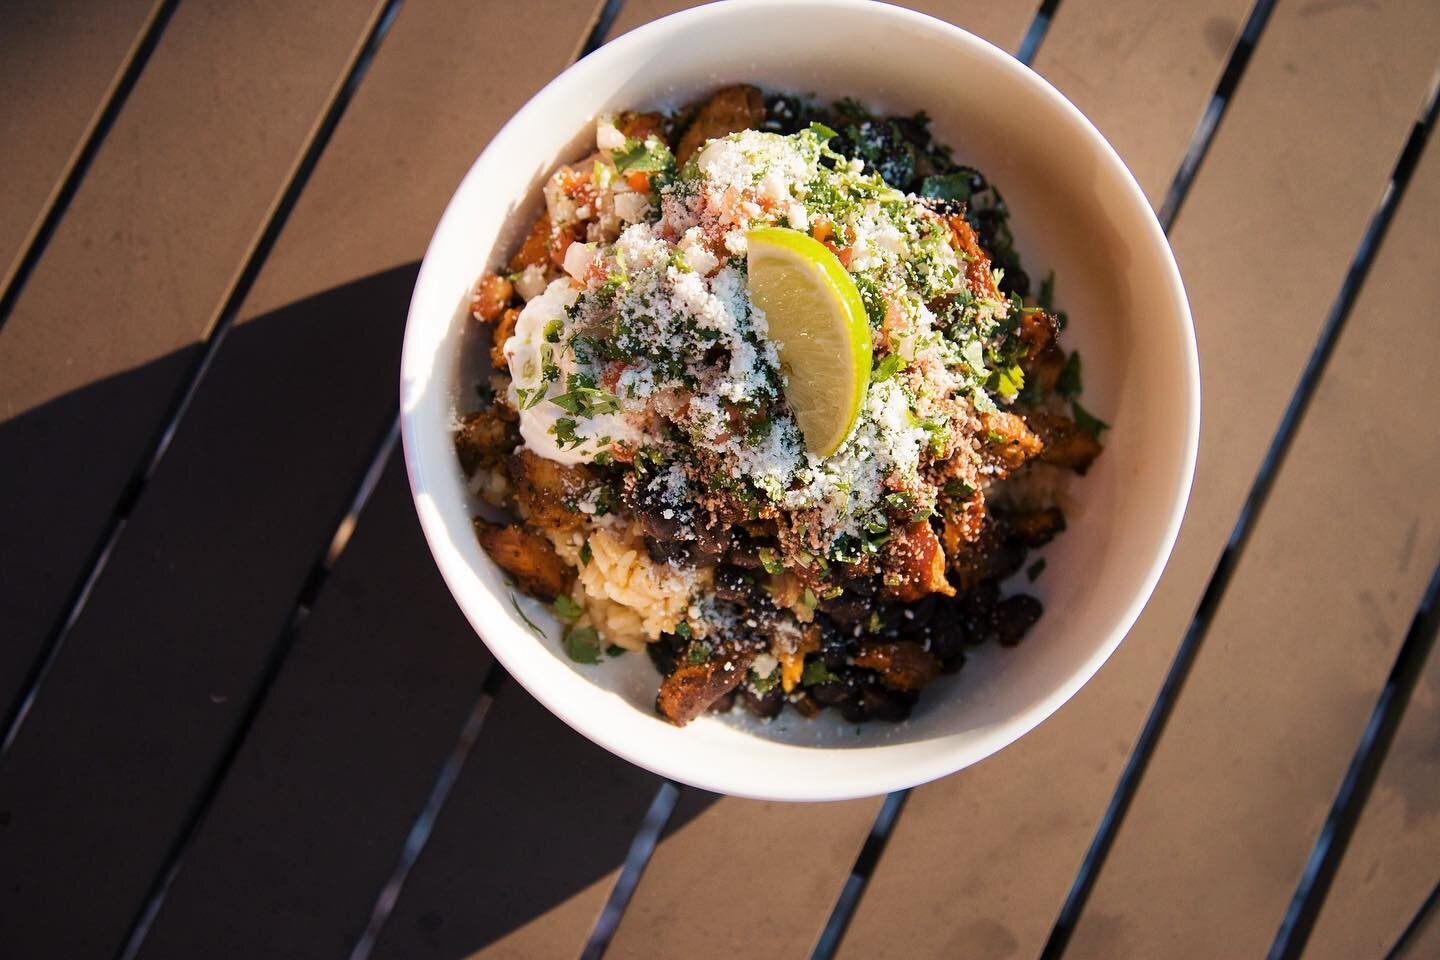 Tacos are our jam, but our rice bowls hit the spot for those looking for a full belly. Our Red Bird rice bowl is packed with ALL THE THINGS: guac, sour cream, rojo chicken, black beans, rice and cheese. Keep things spicy, baby, and splash some @elyuc